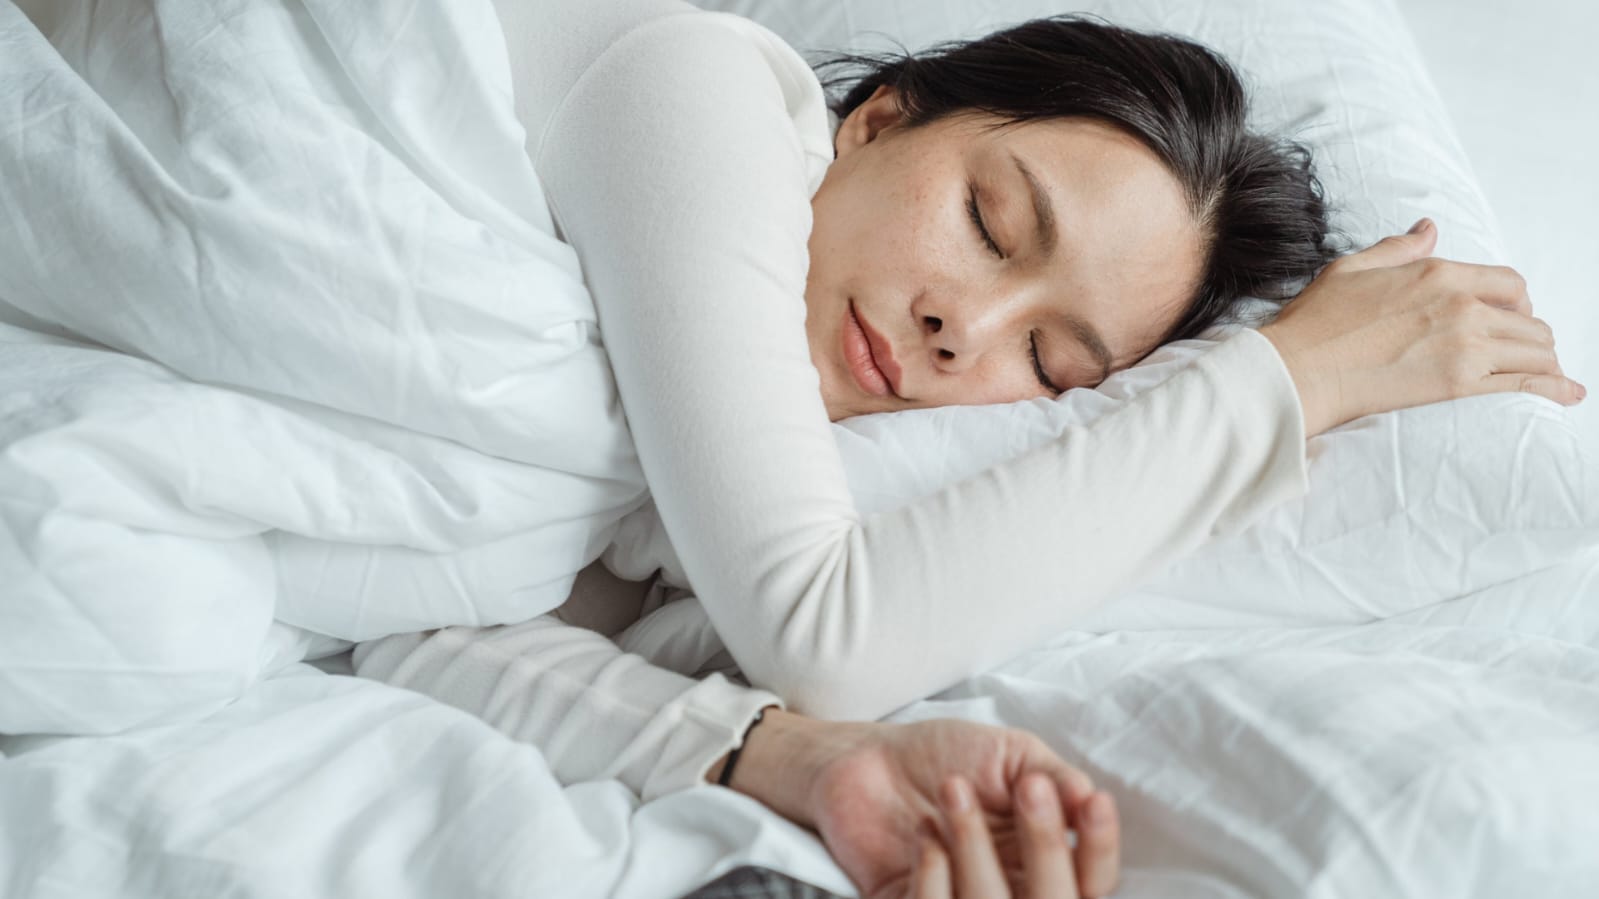 Breathing in sleep affects memory processes: Study